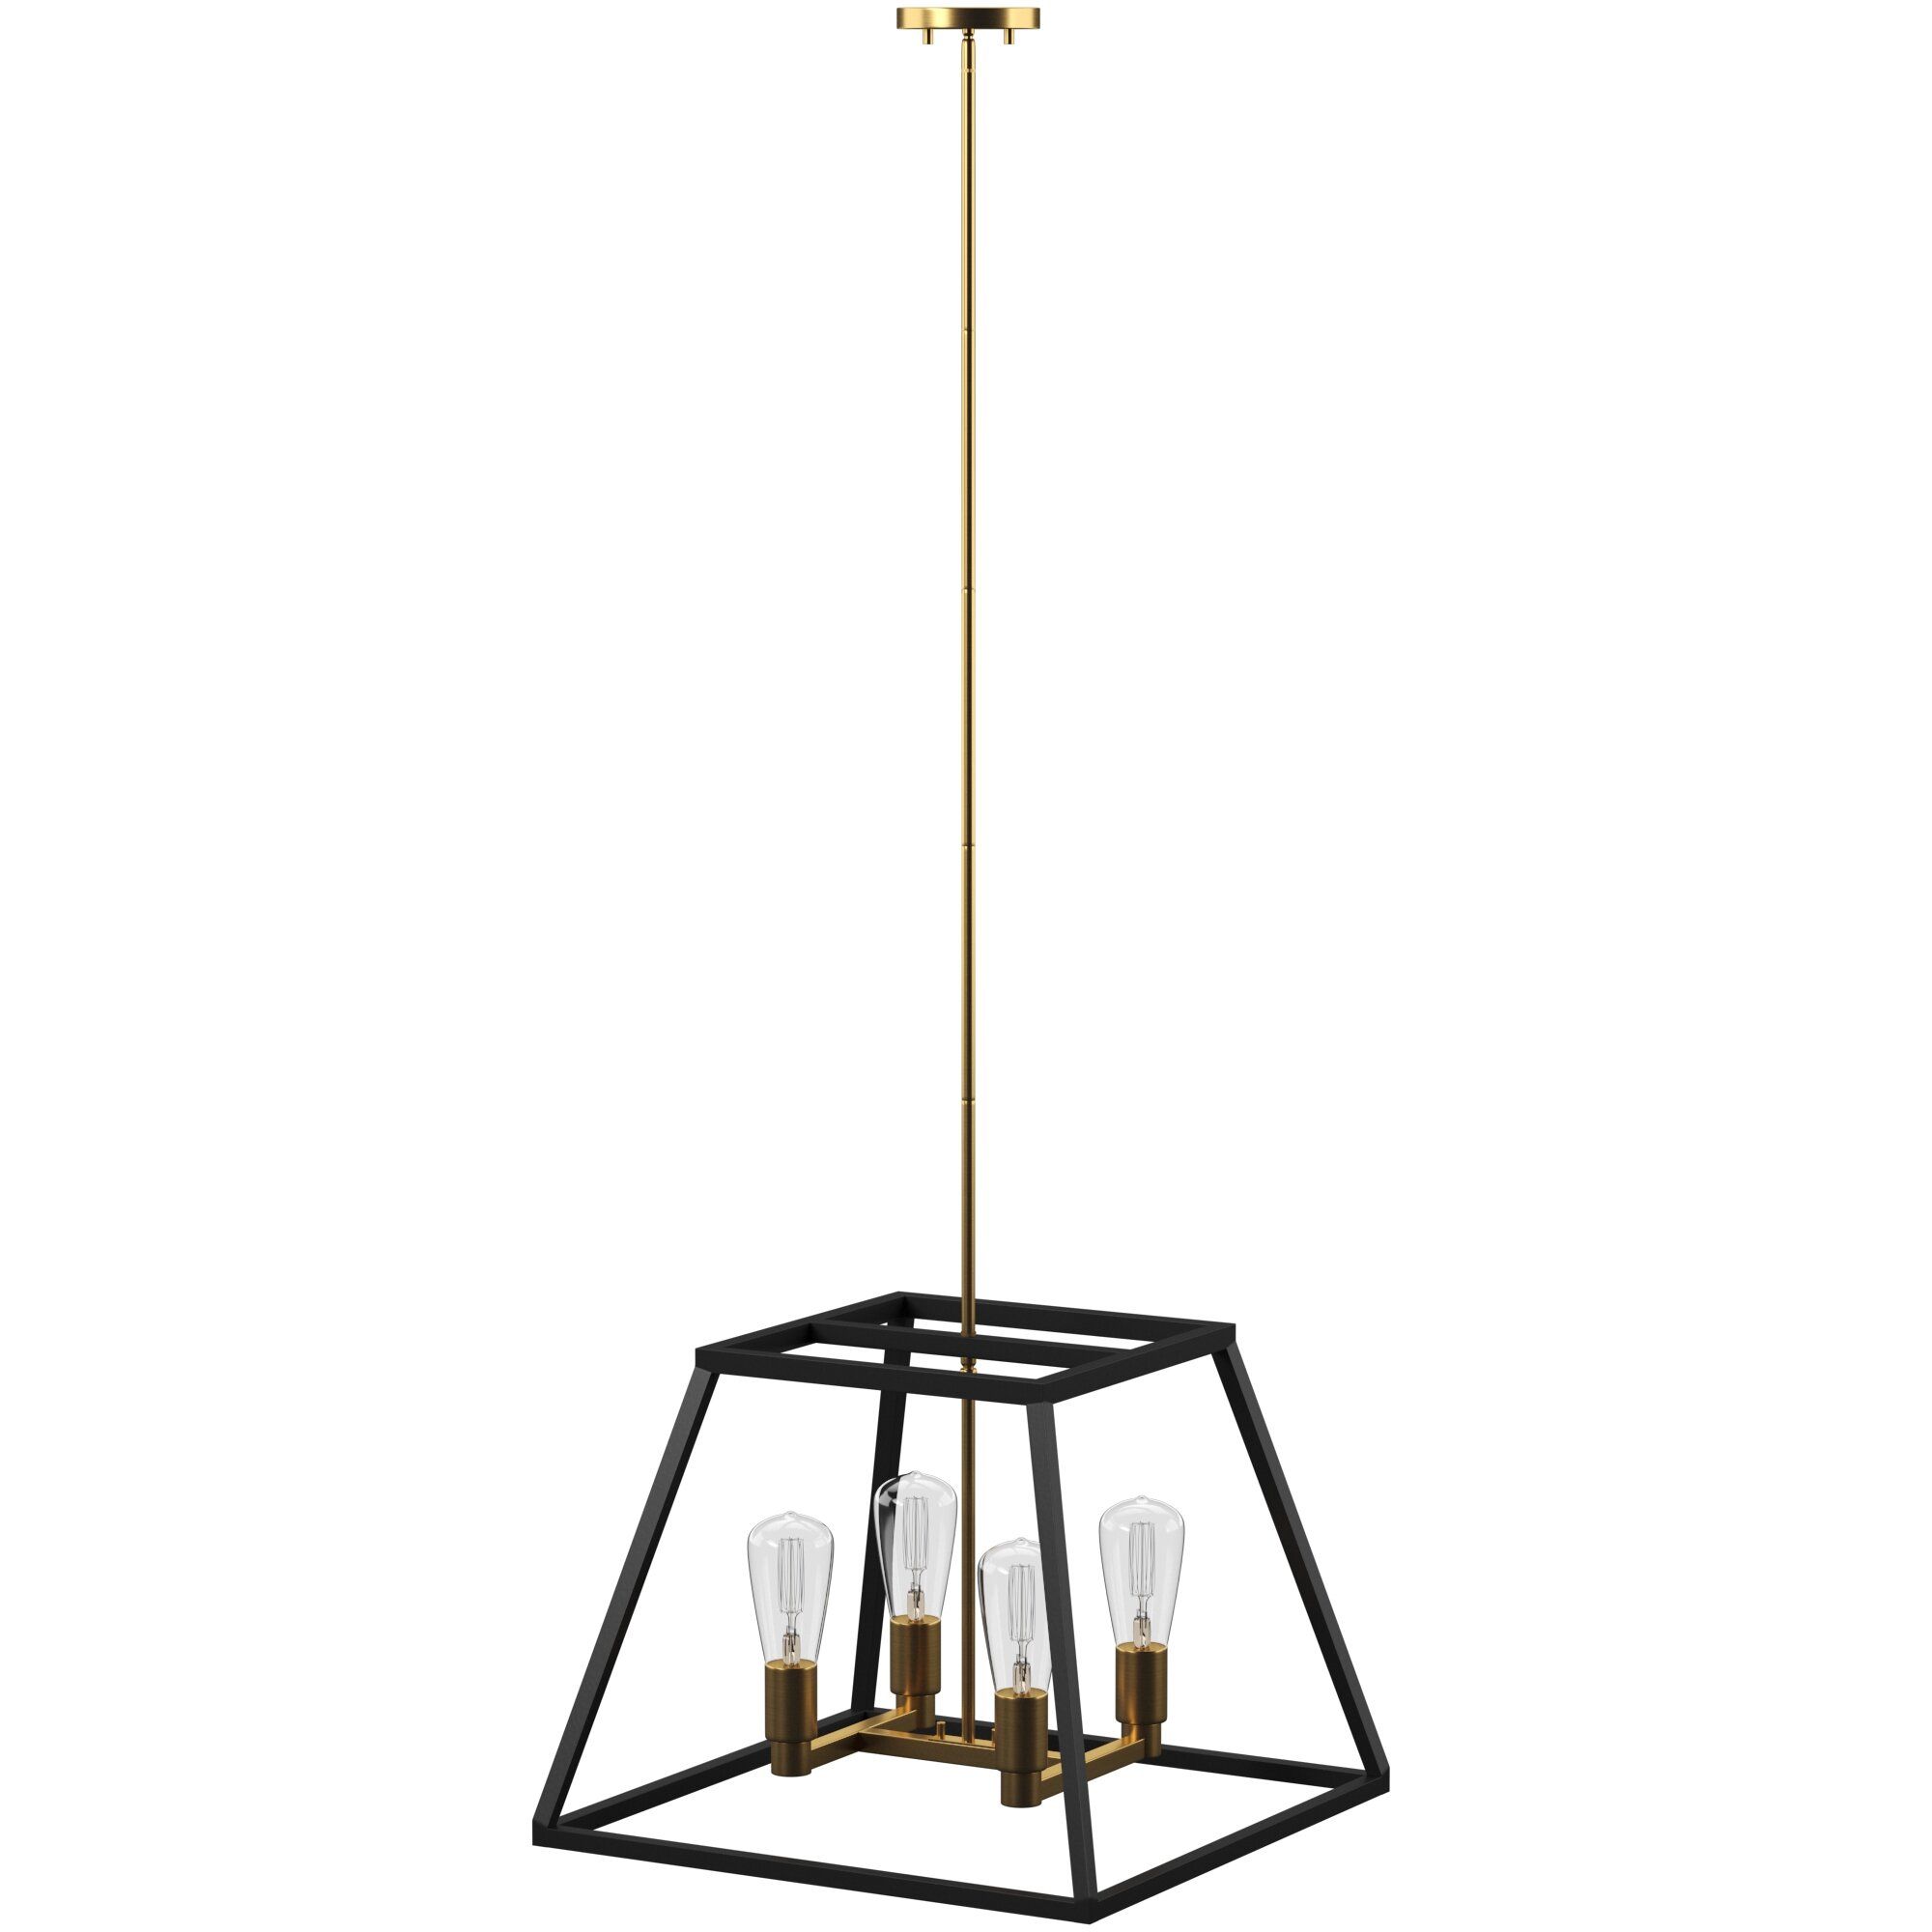 Modern & Contemporary Henry 4 Light Chandelier | Allmodern Pertaining To Hendry 4 Light Globe Chandeliers (View 30 of 30)